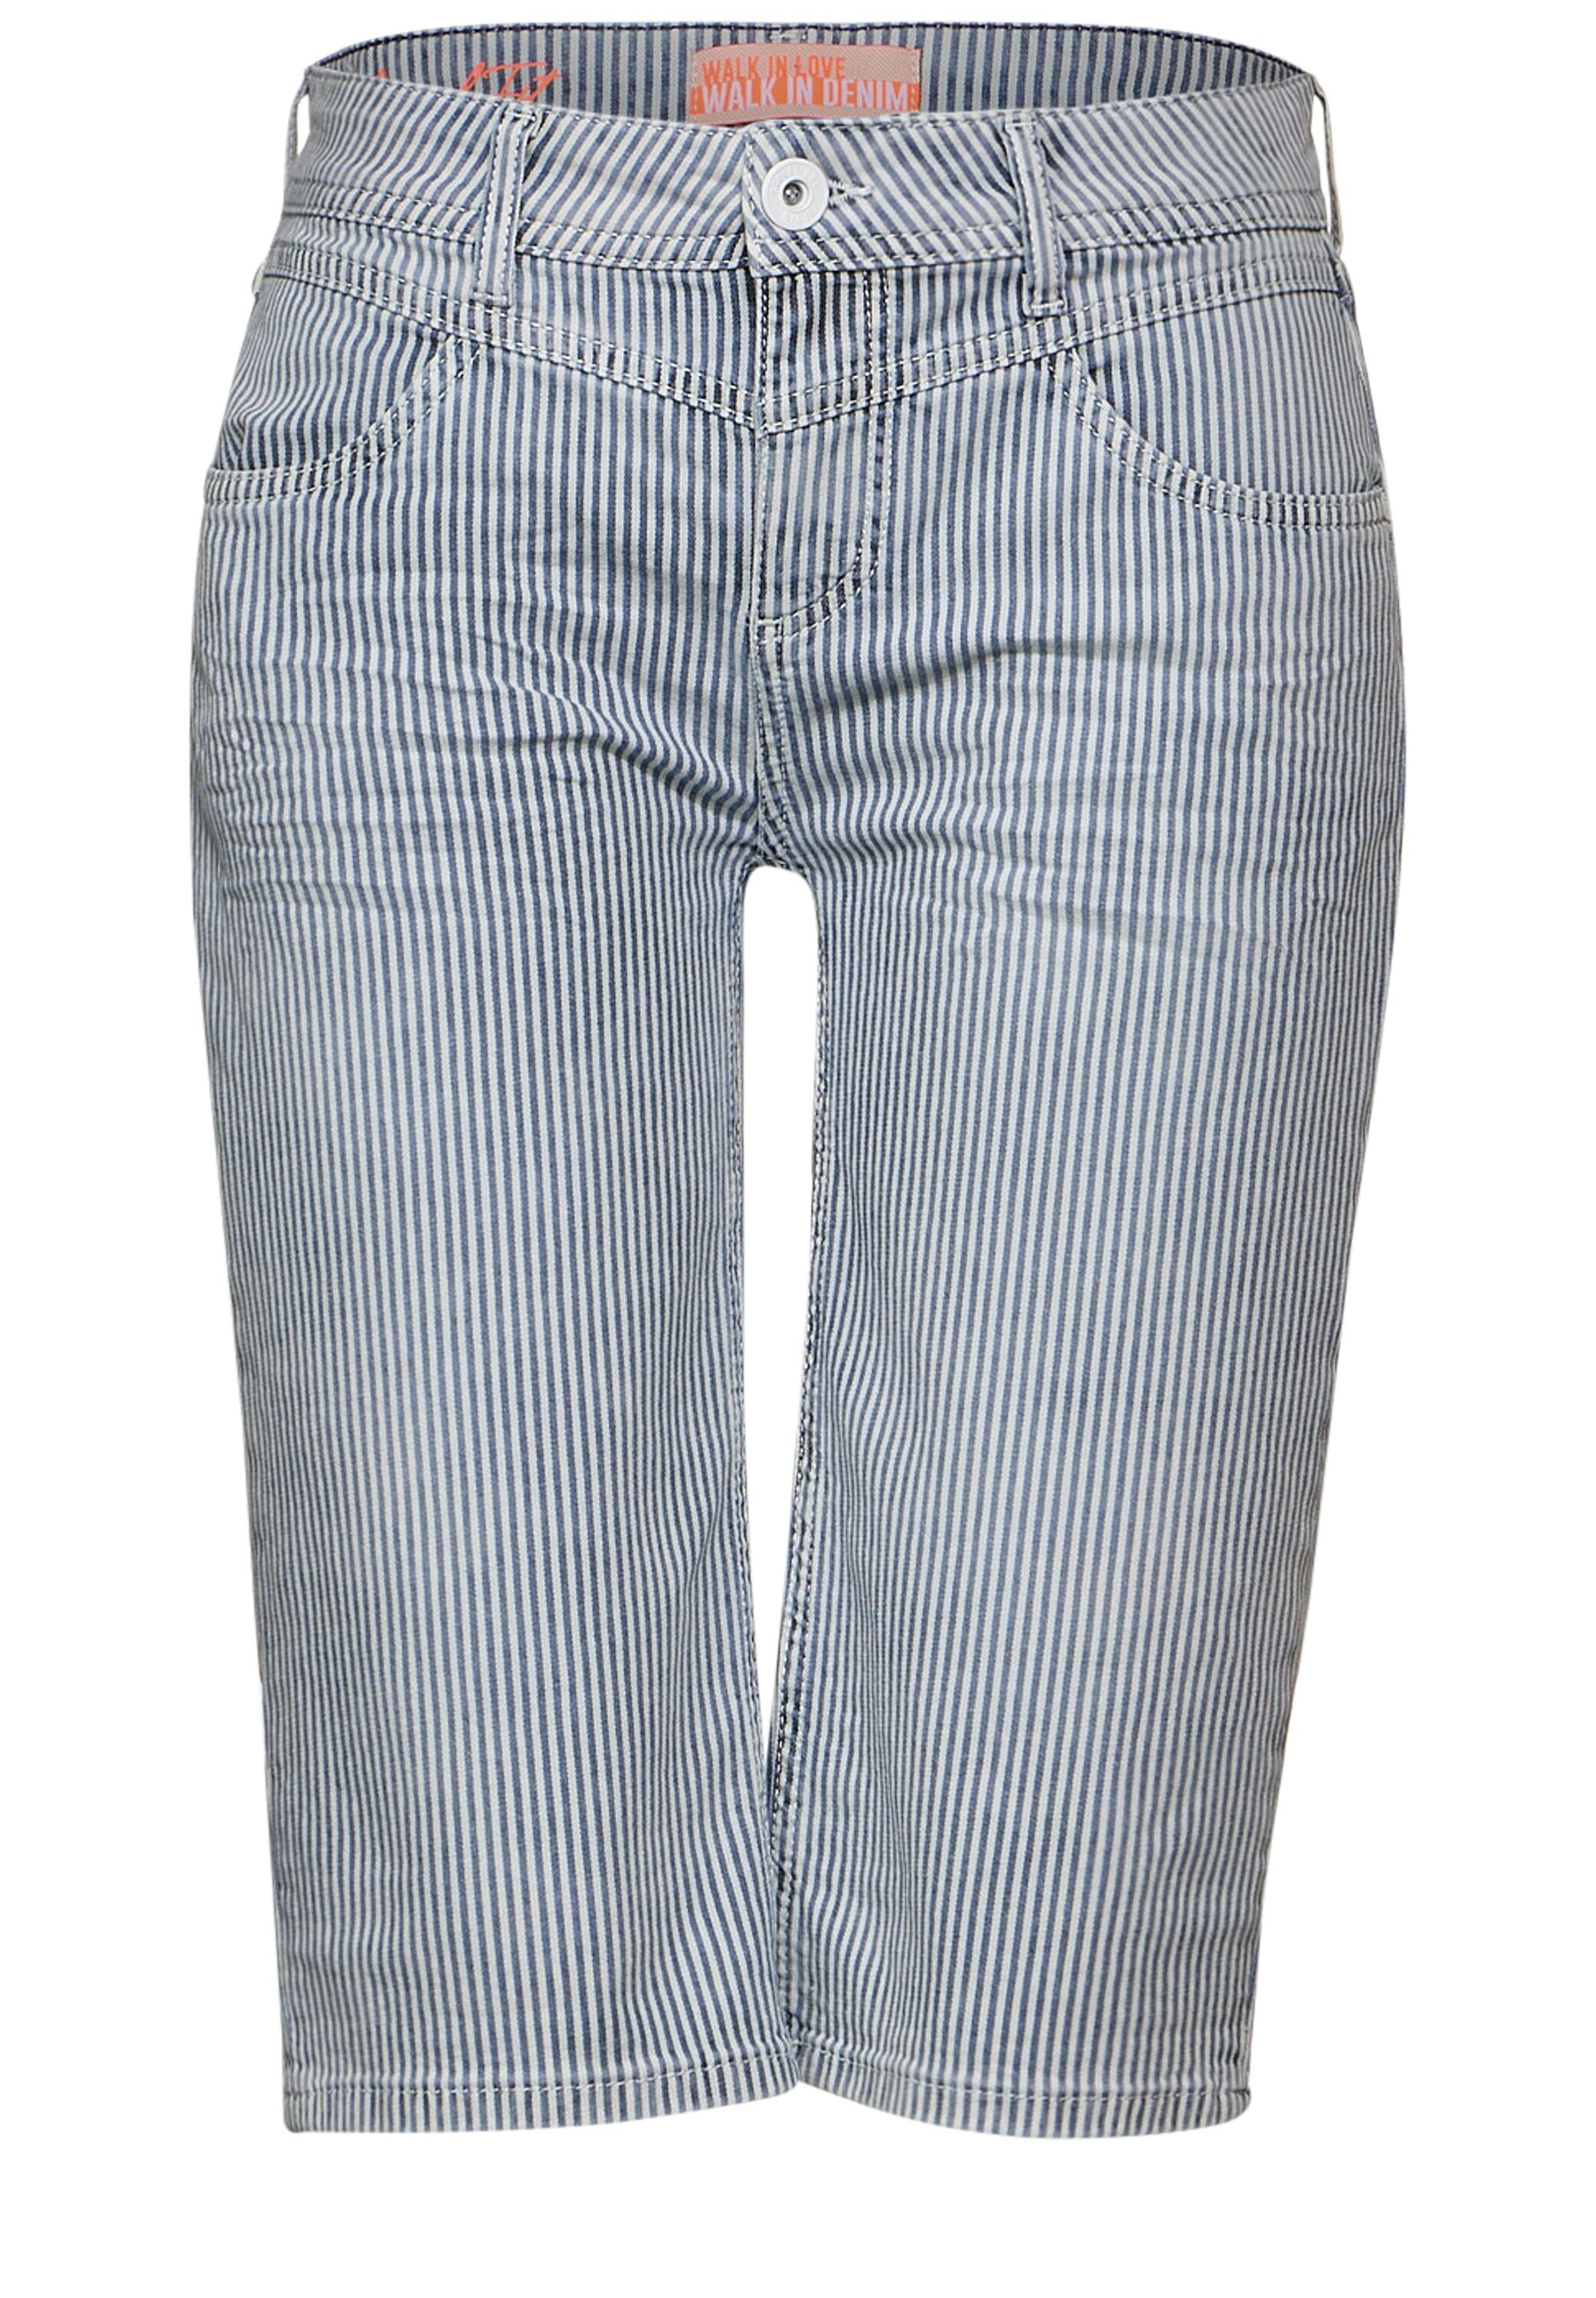 STREET ONE Gerade Jeans, Middle Waist